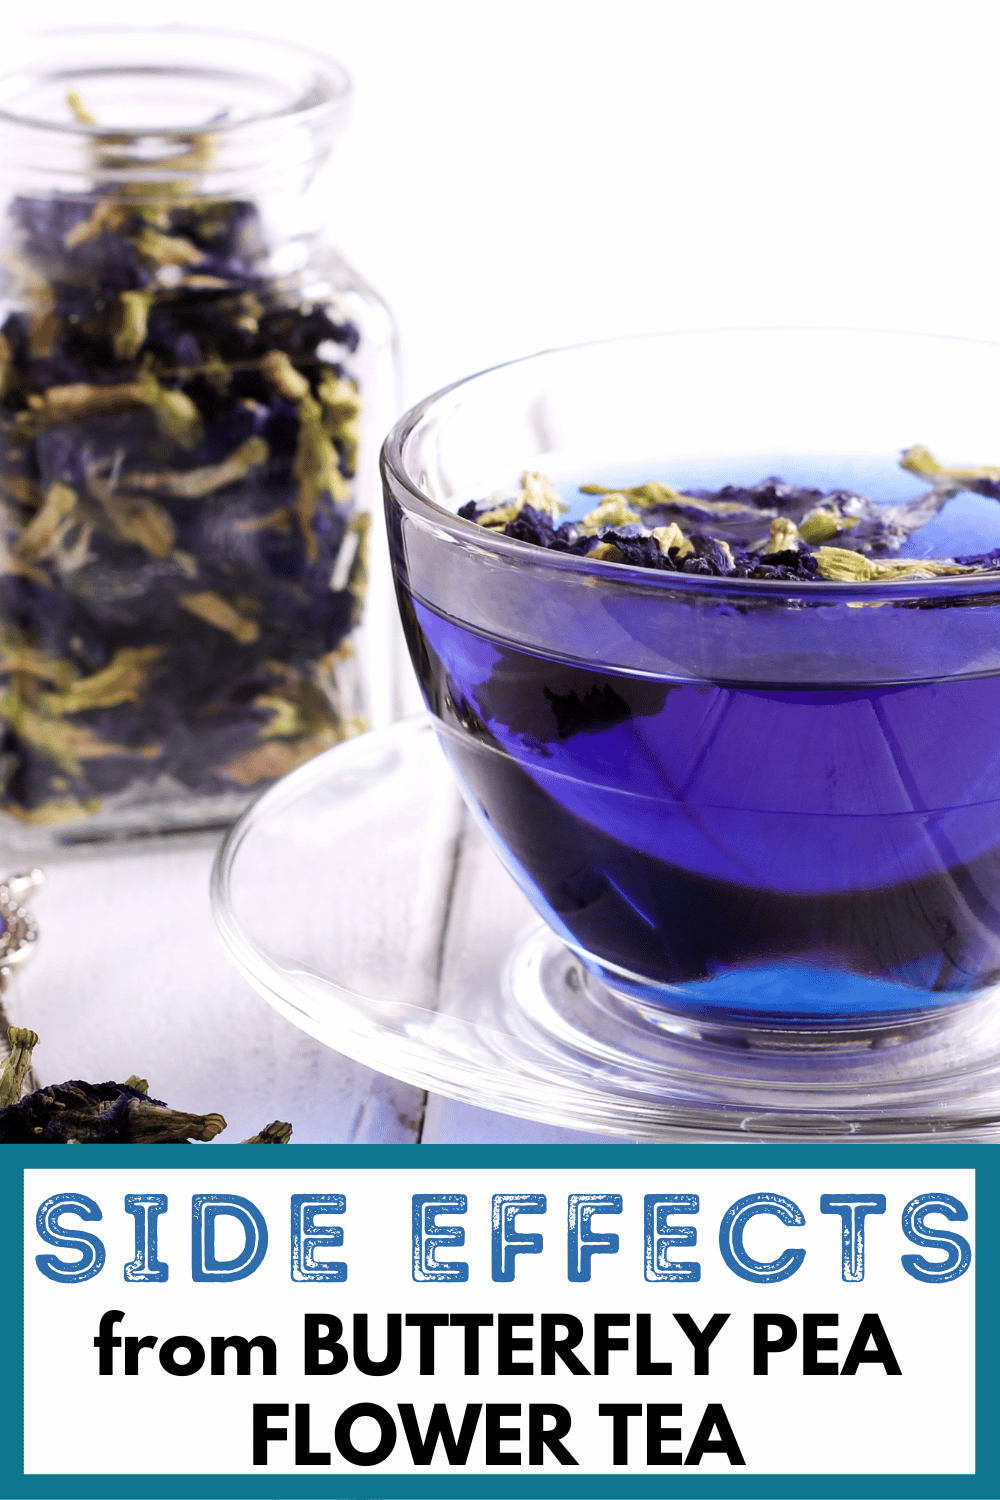 vibrant blue tea with blue butterfly pea flowers with text, "side effects from butterfly pea flower tea"